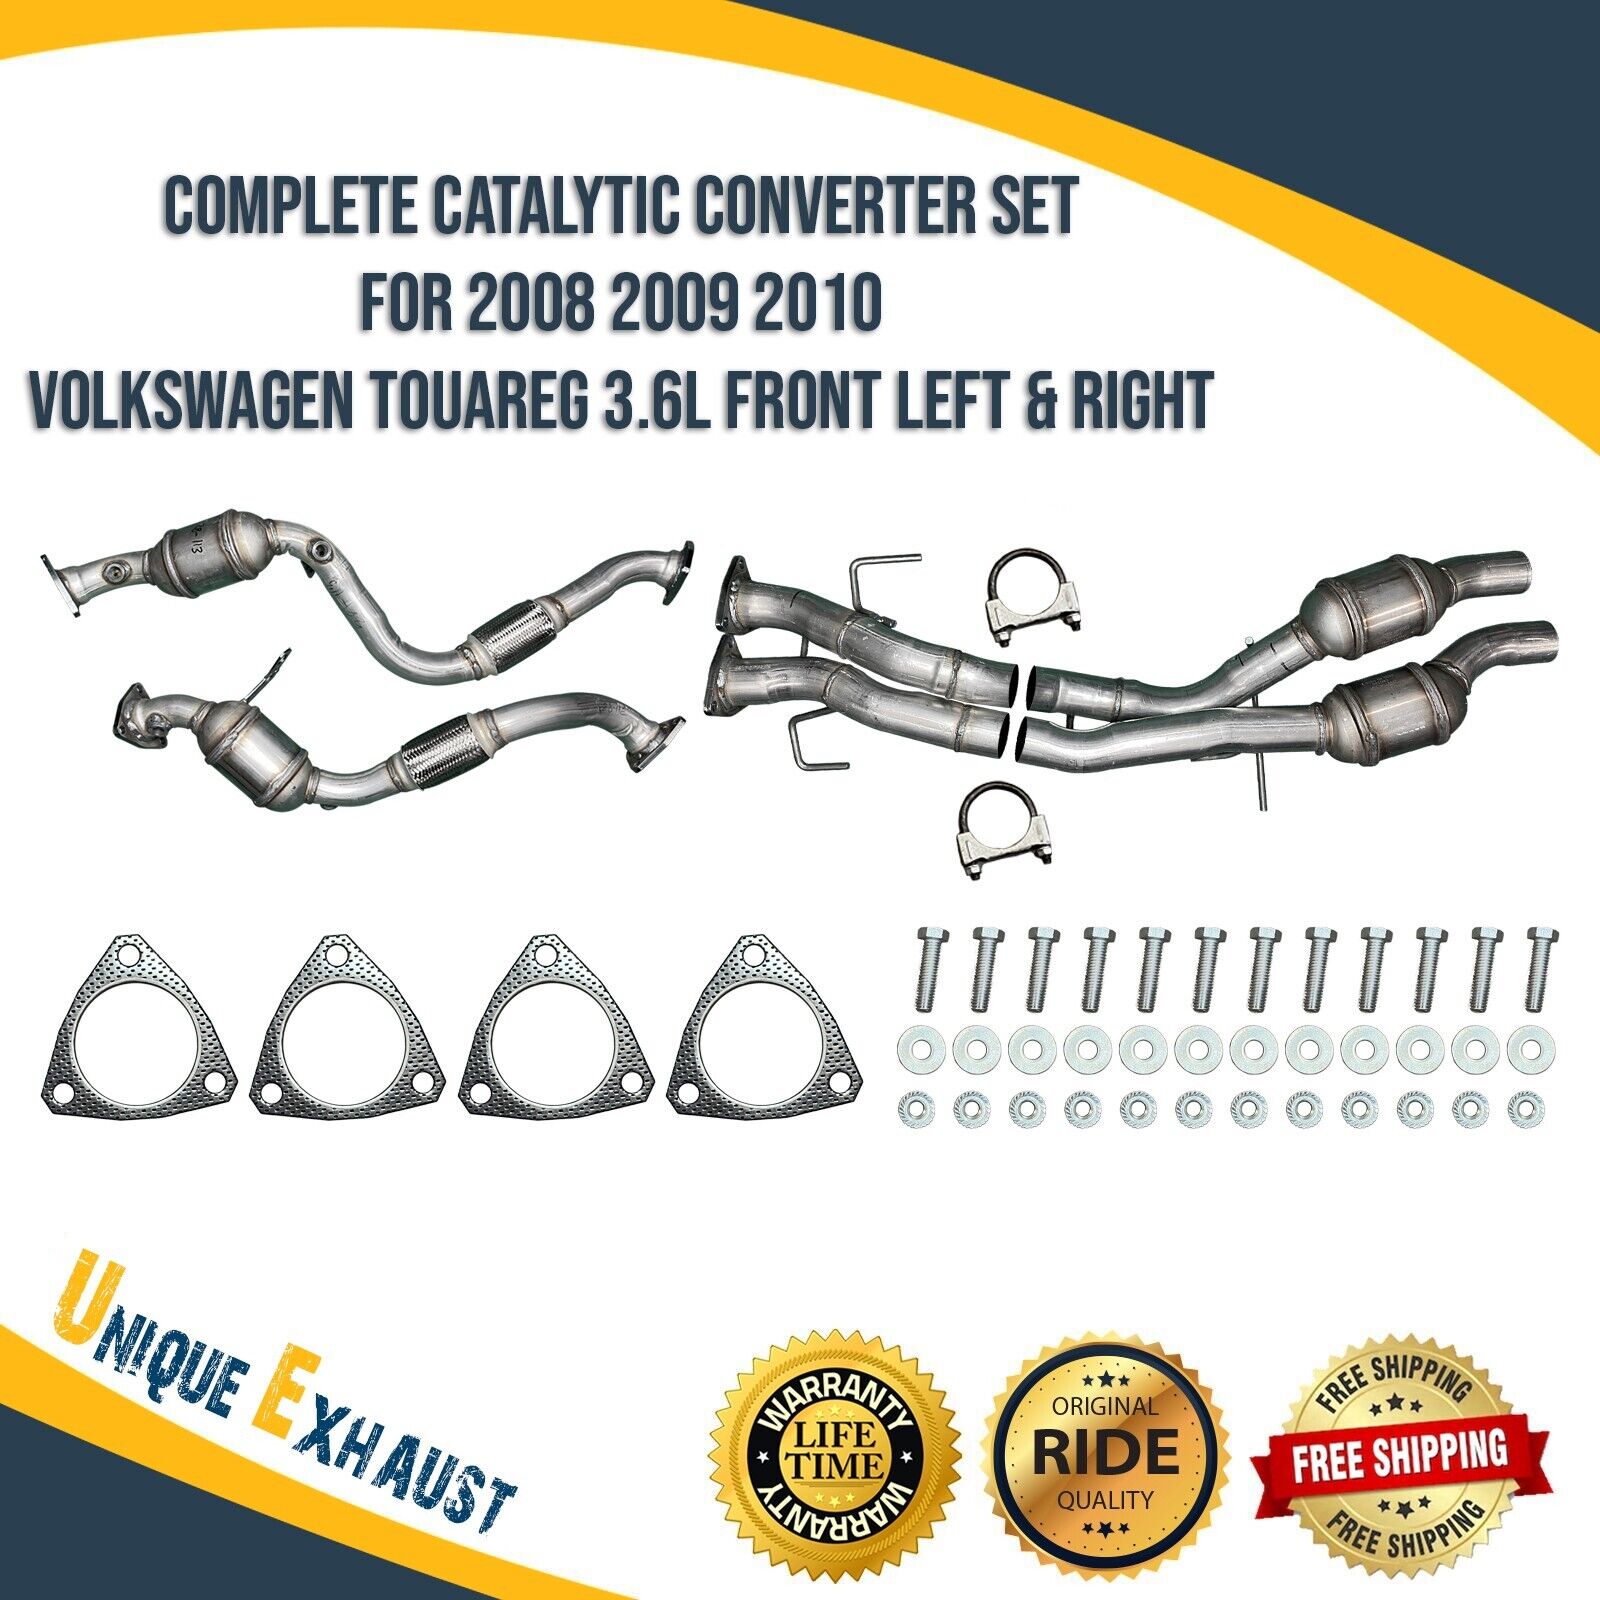 Complete Catalytic Set for 2008-2010 Volkswagen Touareg 3.6L Front Left & Right